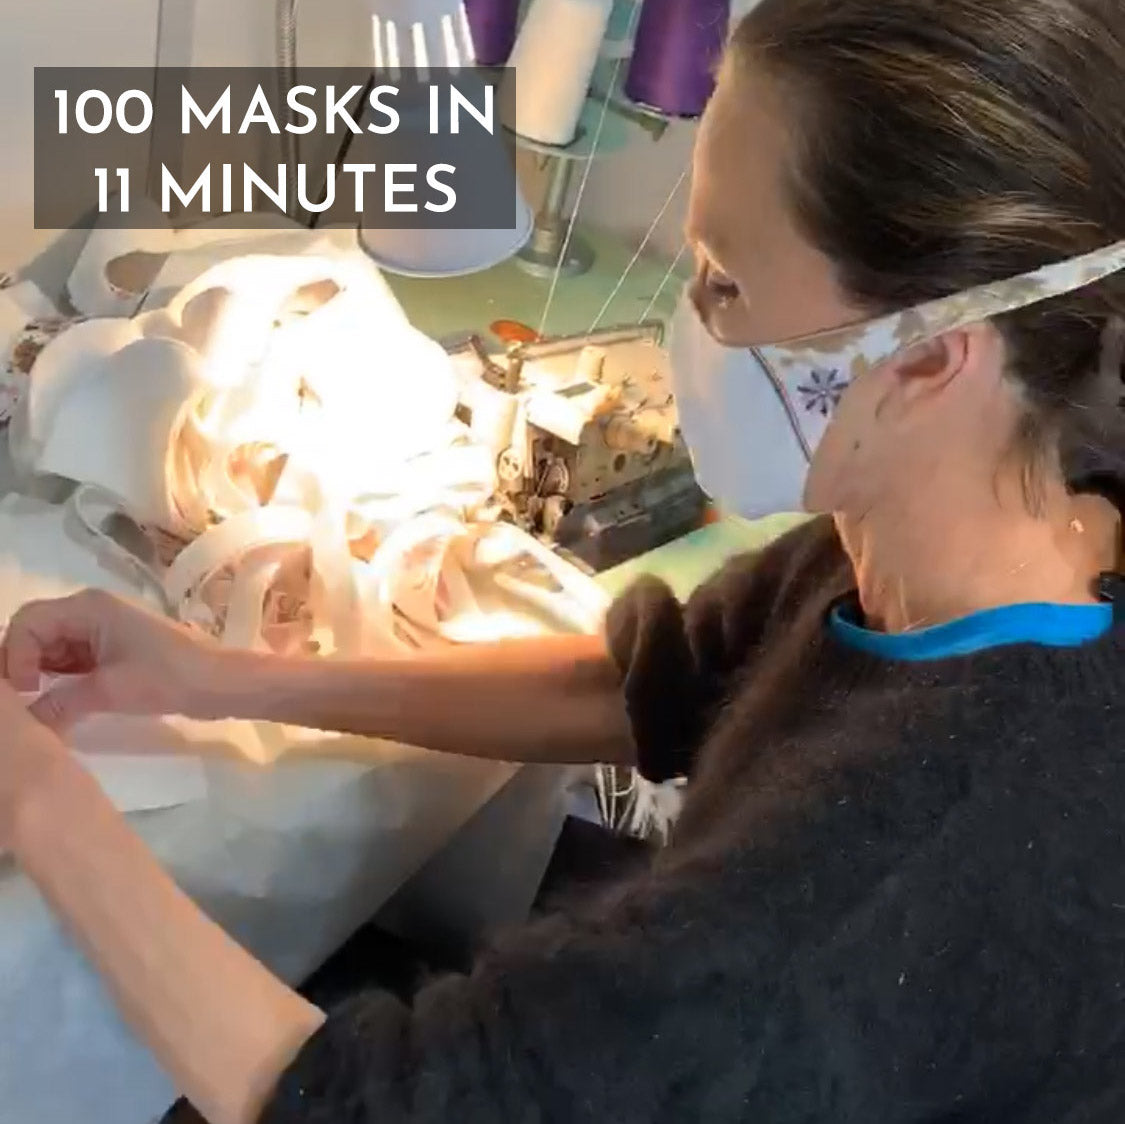 #Flattenthecurve with DIY Mask